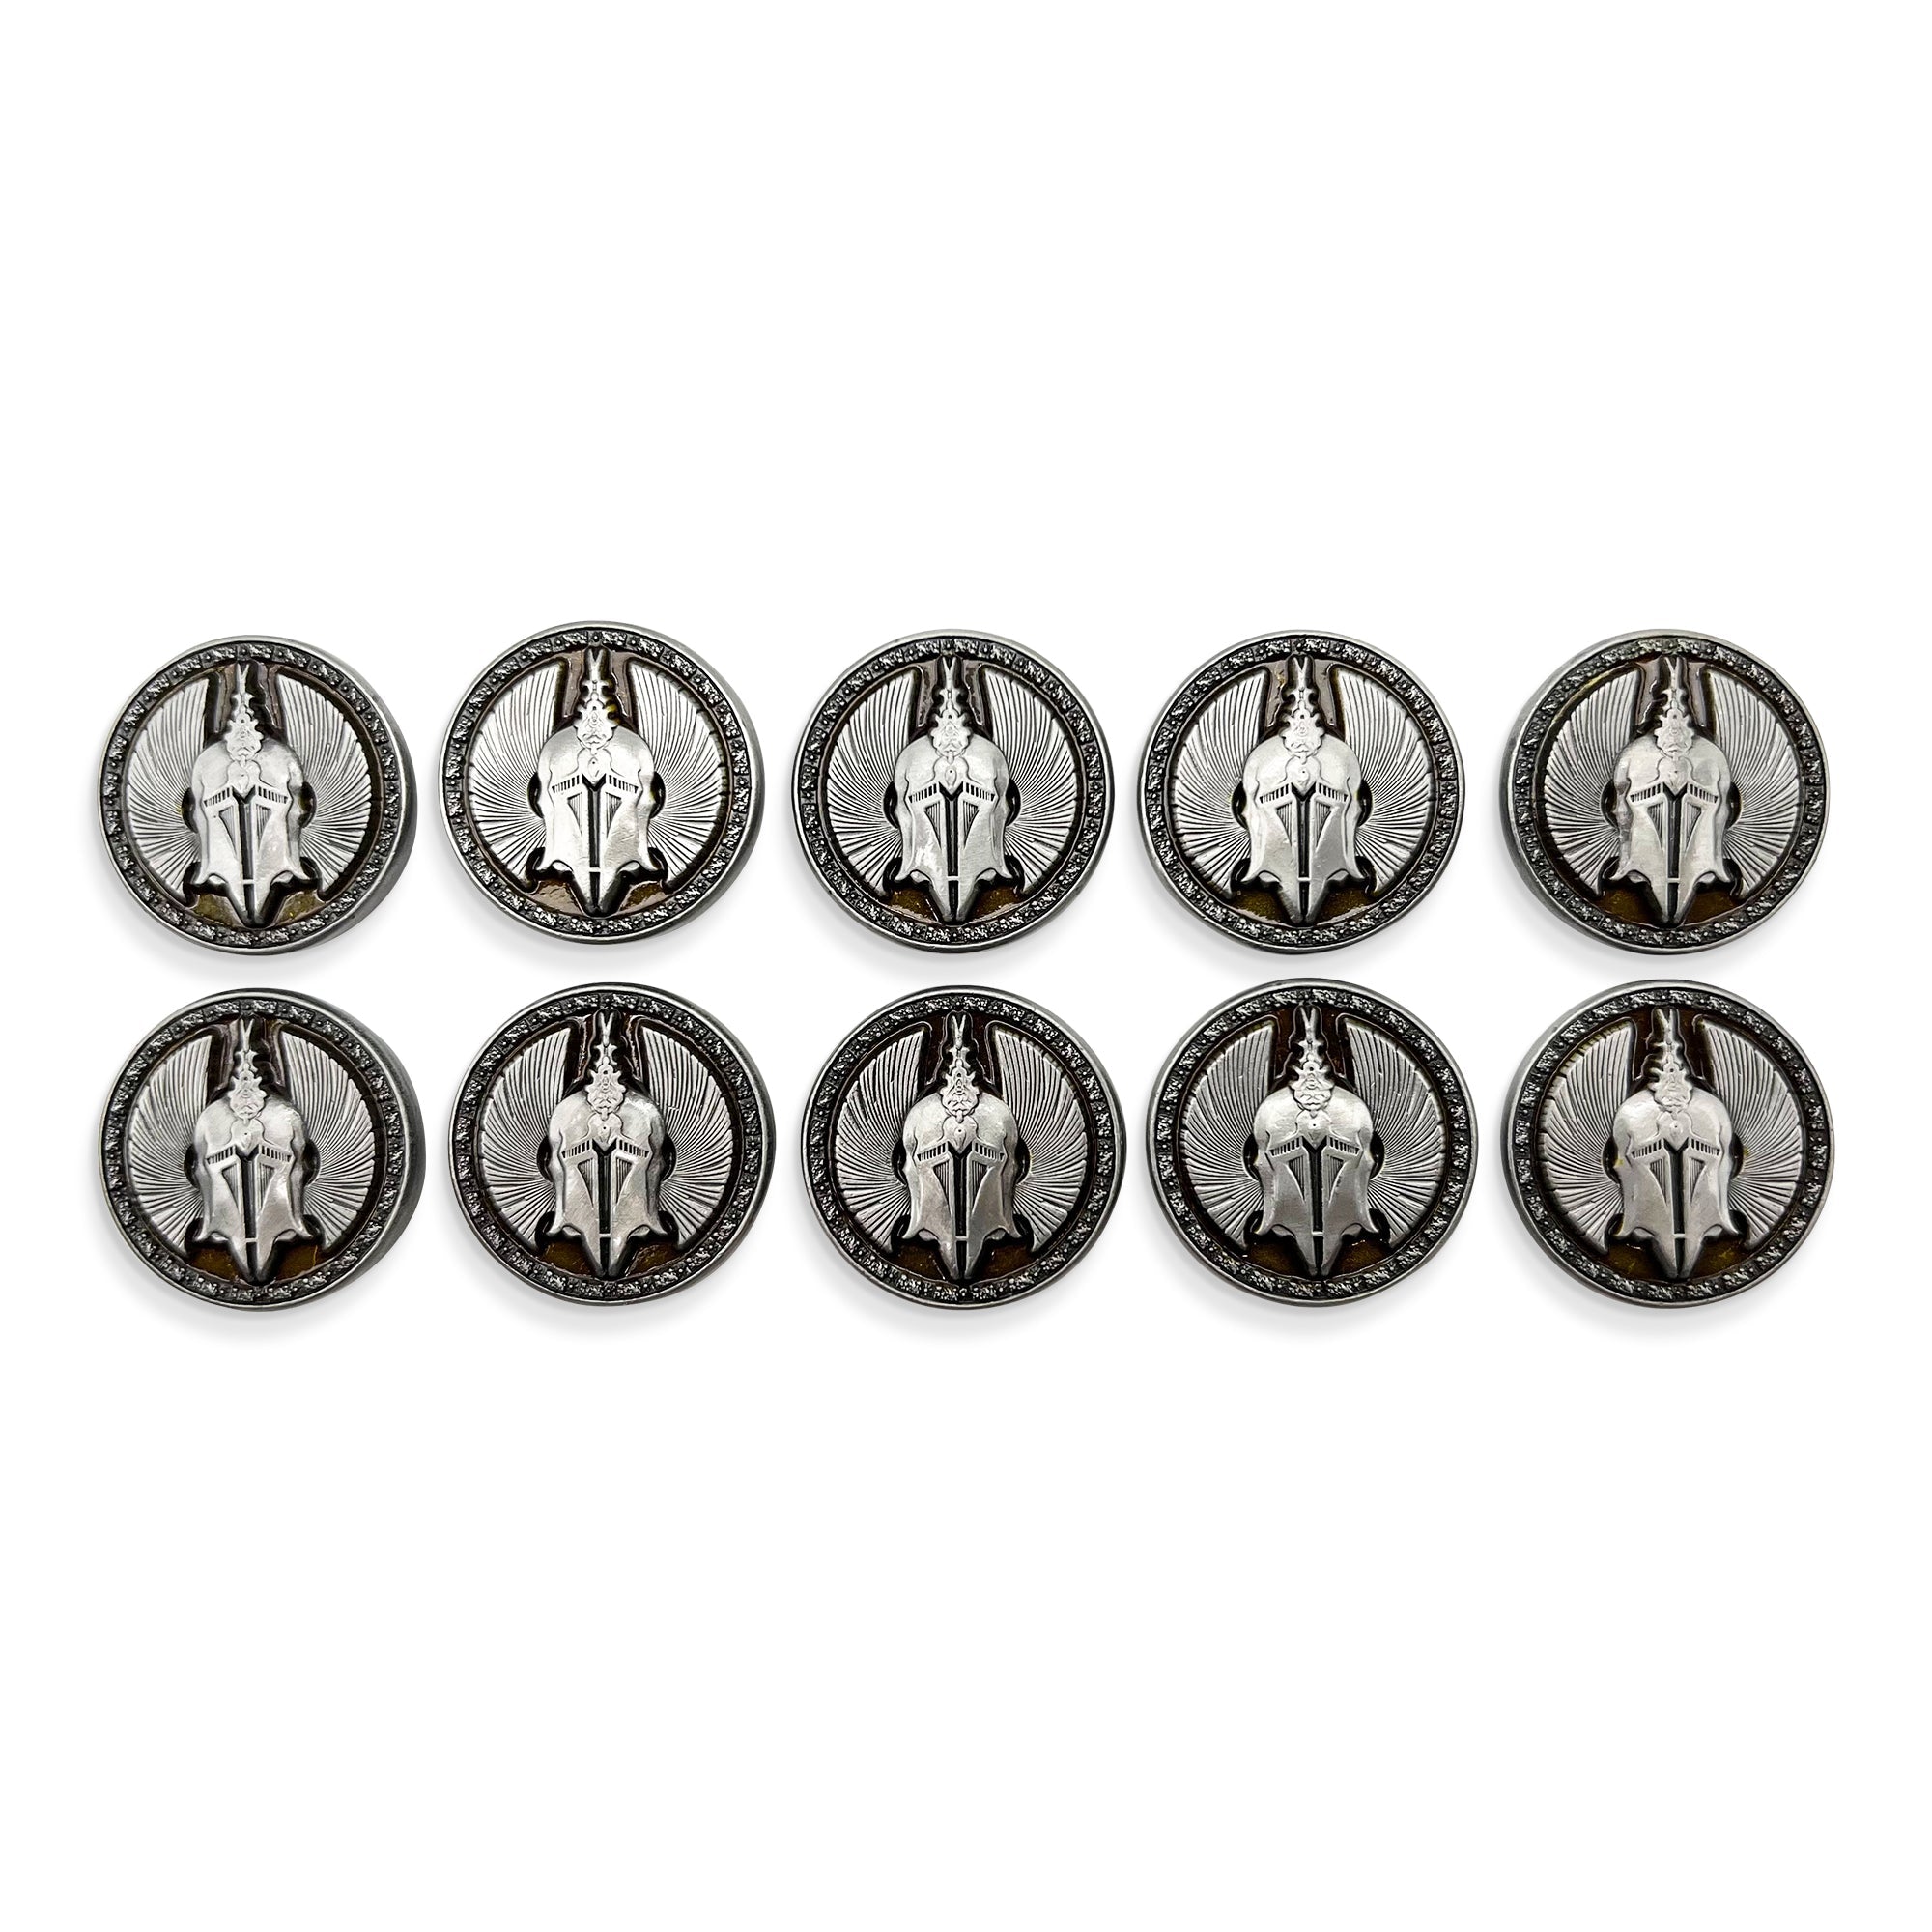 Profession Coins - Paladin Metal Coins Set of 10 - NOR 03413